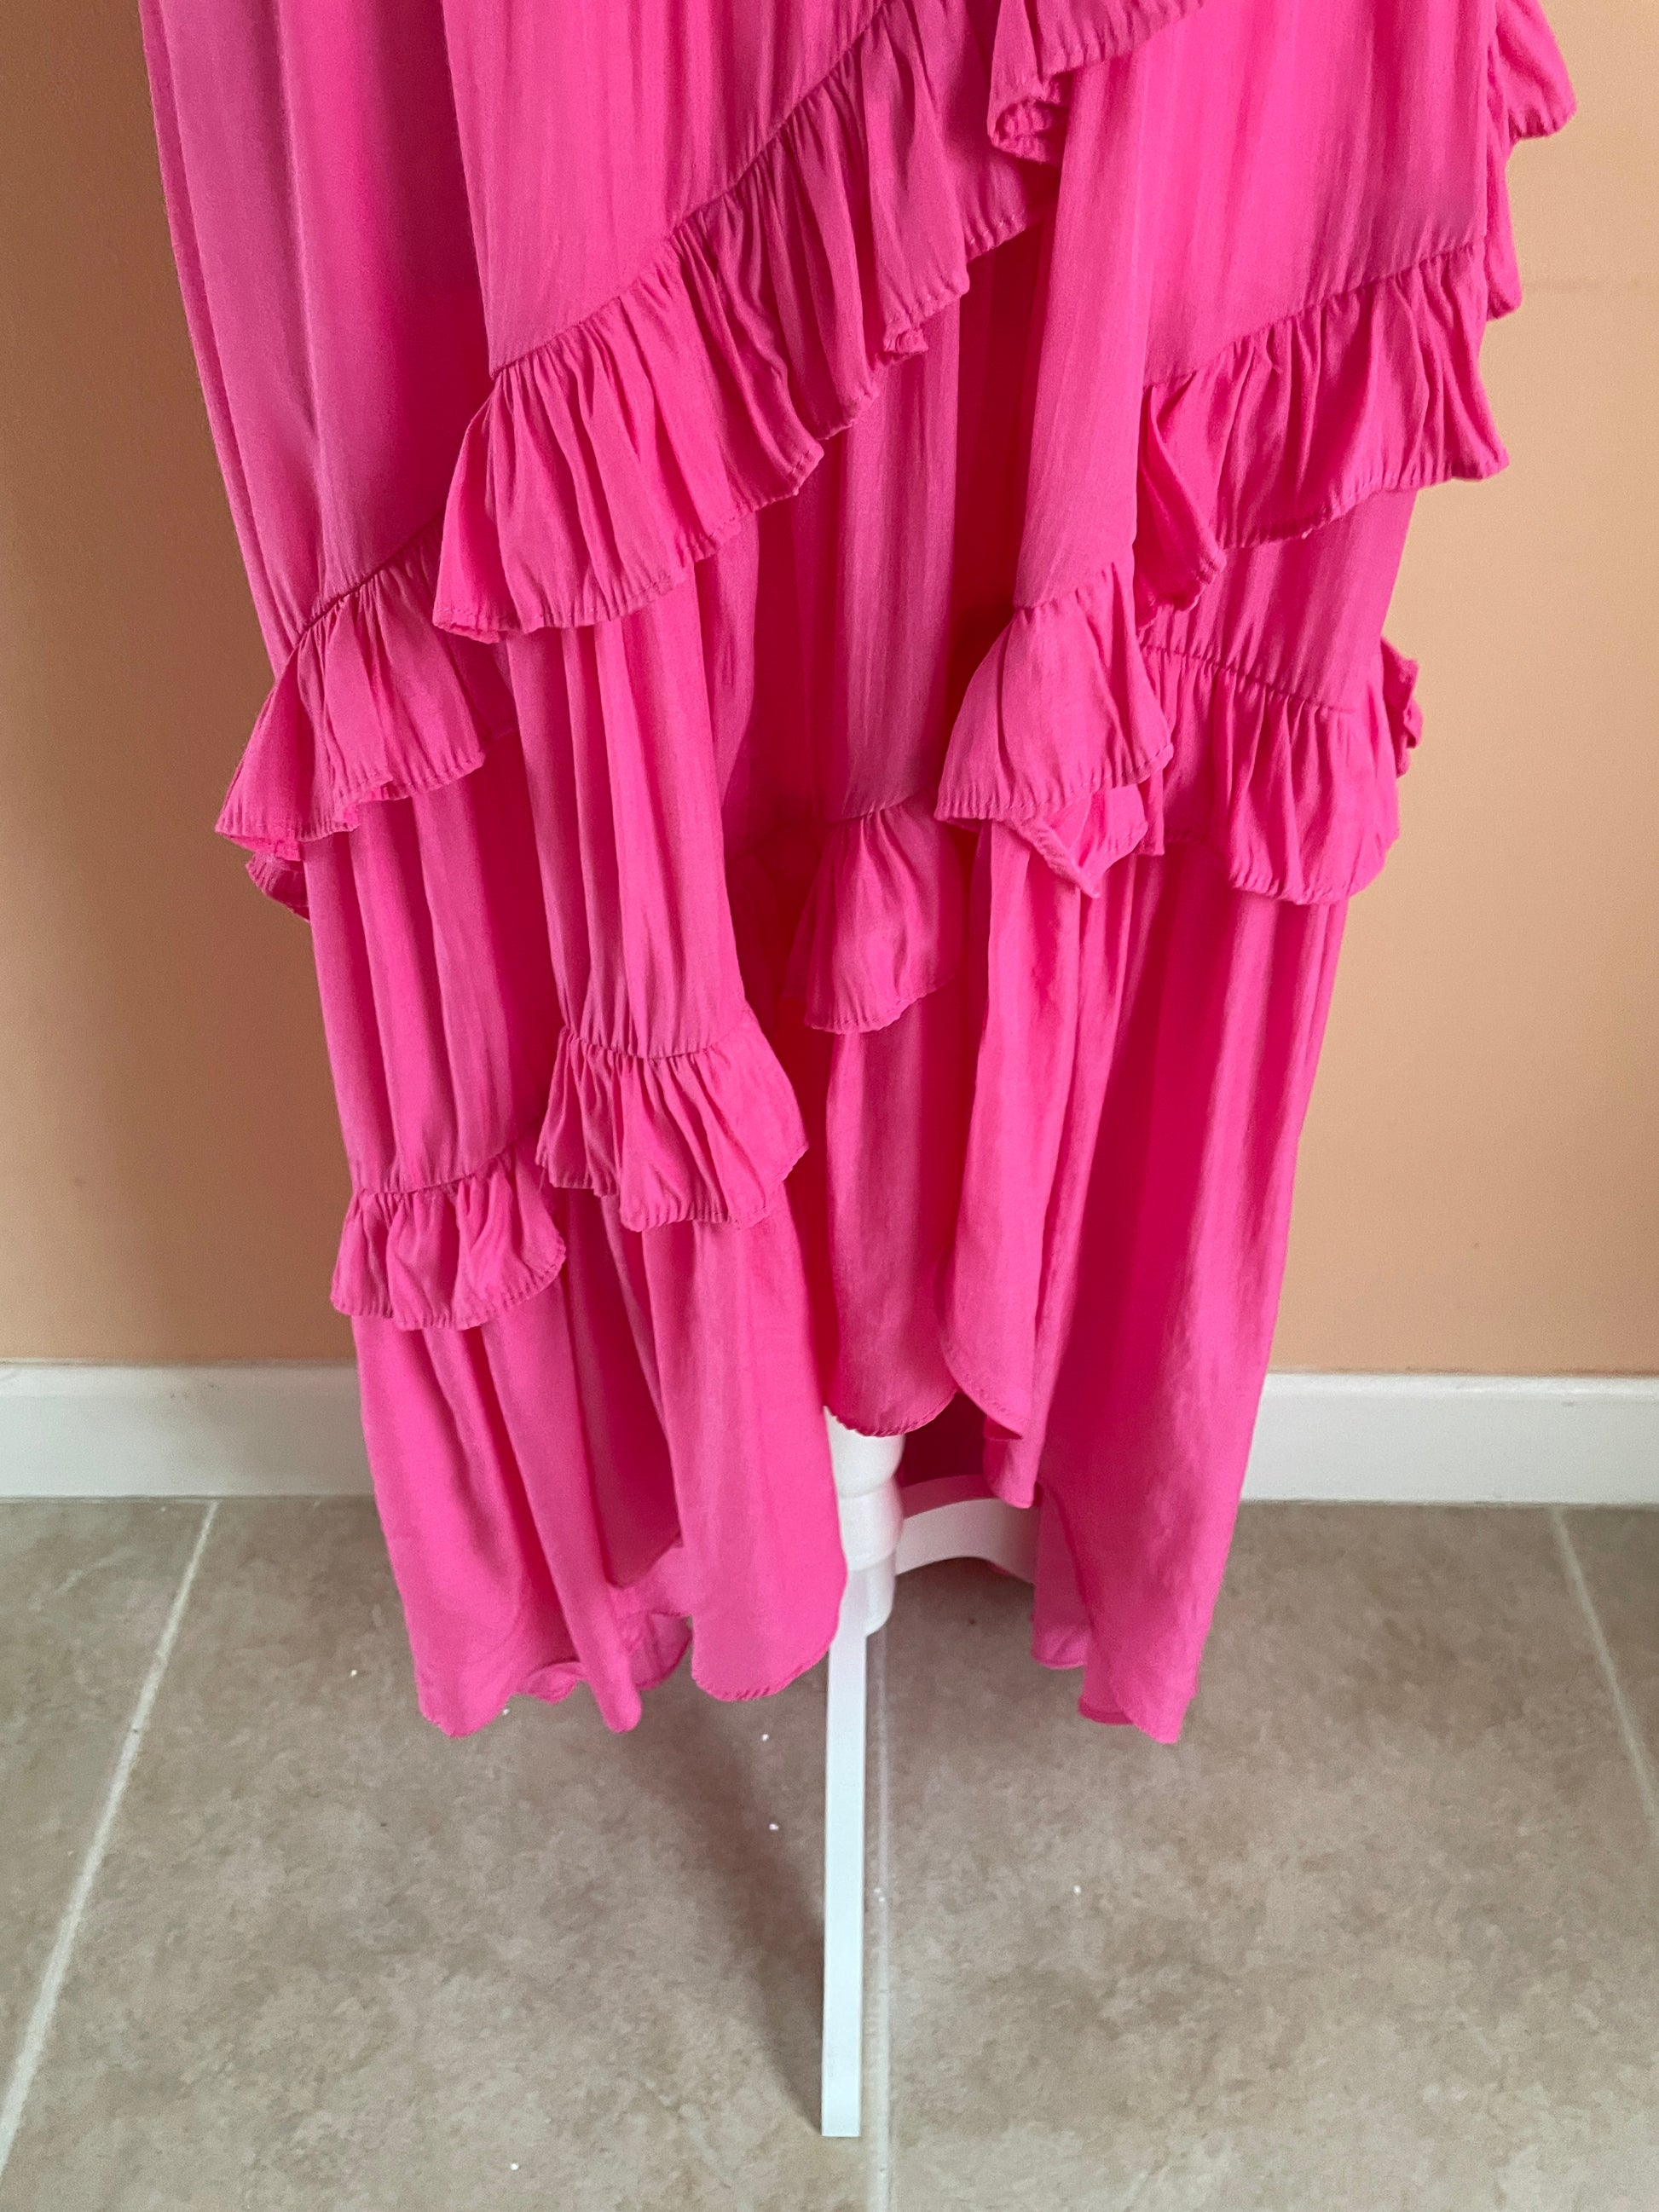  2000s  Pretty Tiered Ruffles Cold Shoulder High Low Pink You Got What it Takes Long Dress S